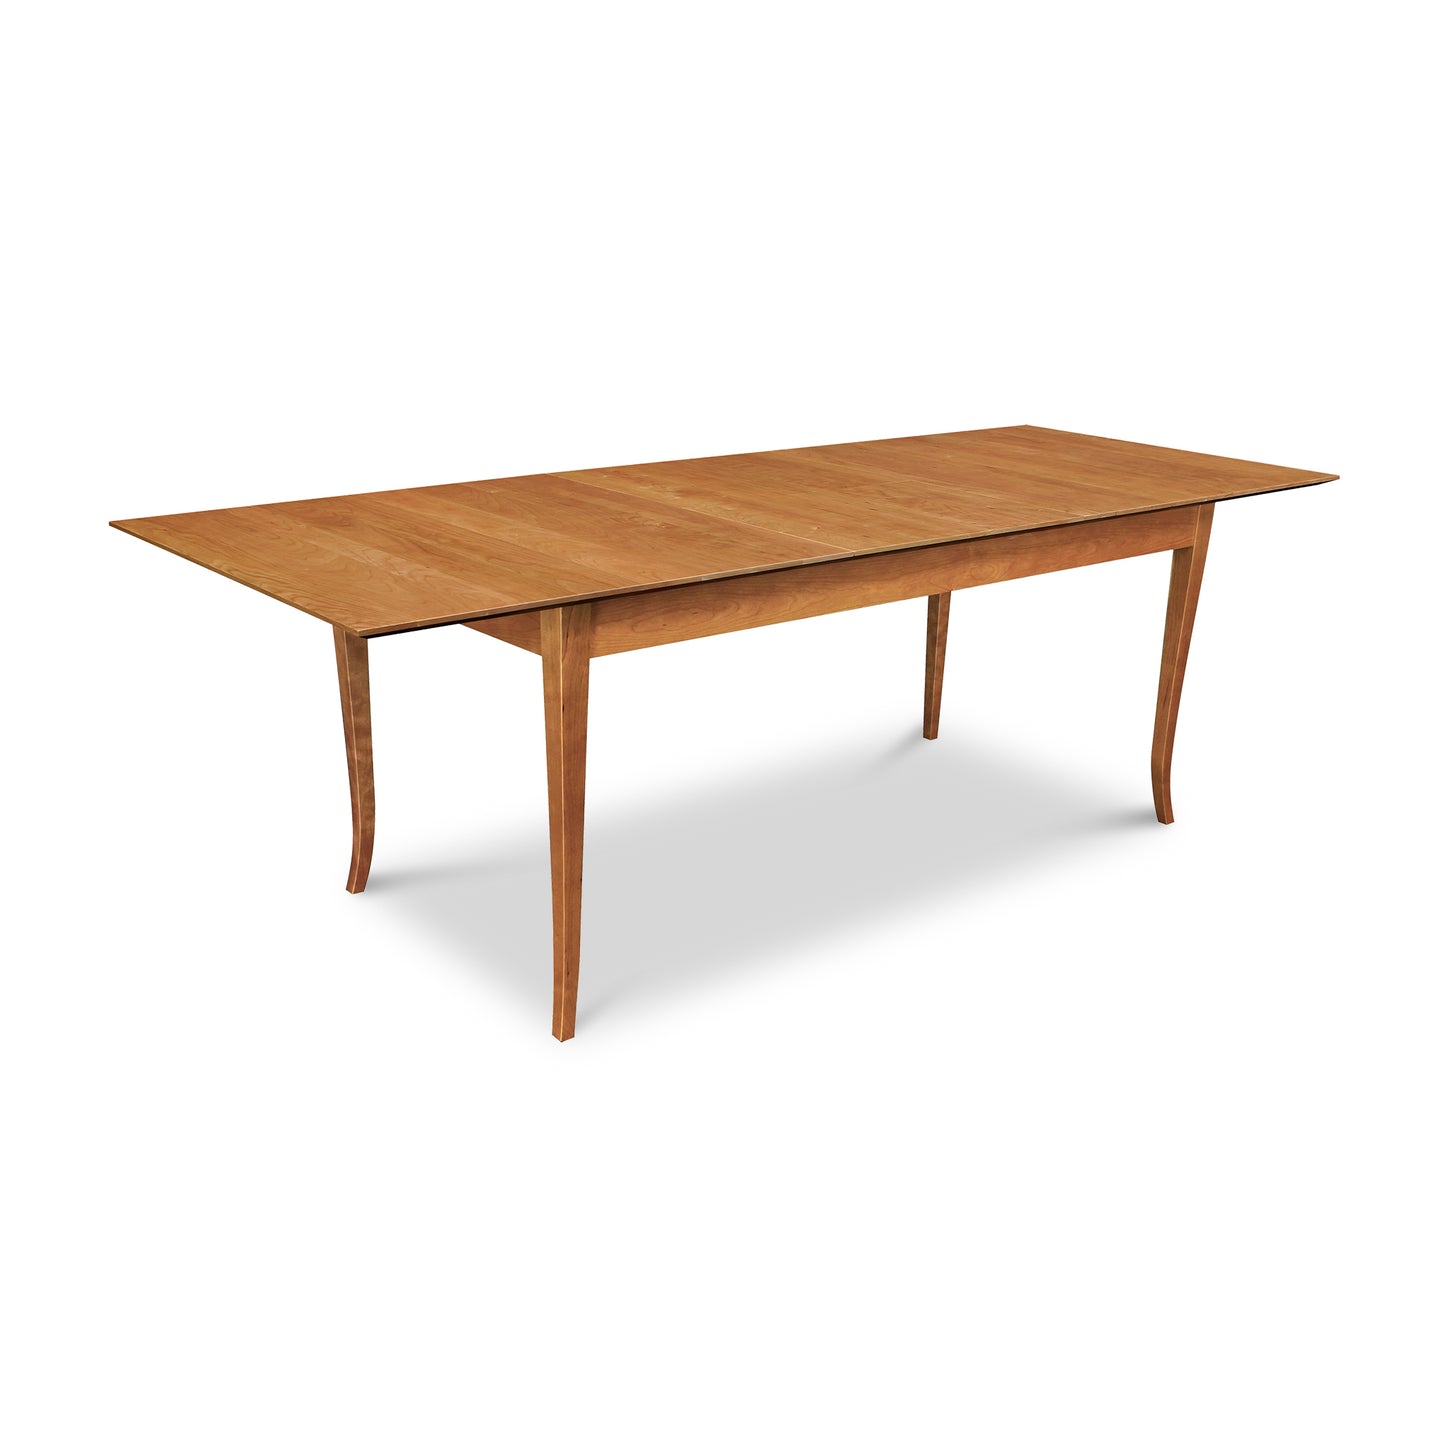 A Classic Shaker Flare Leg Butterfly Extension Table with a wooden top and flared legs made by Lyndon Furniture.